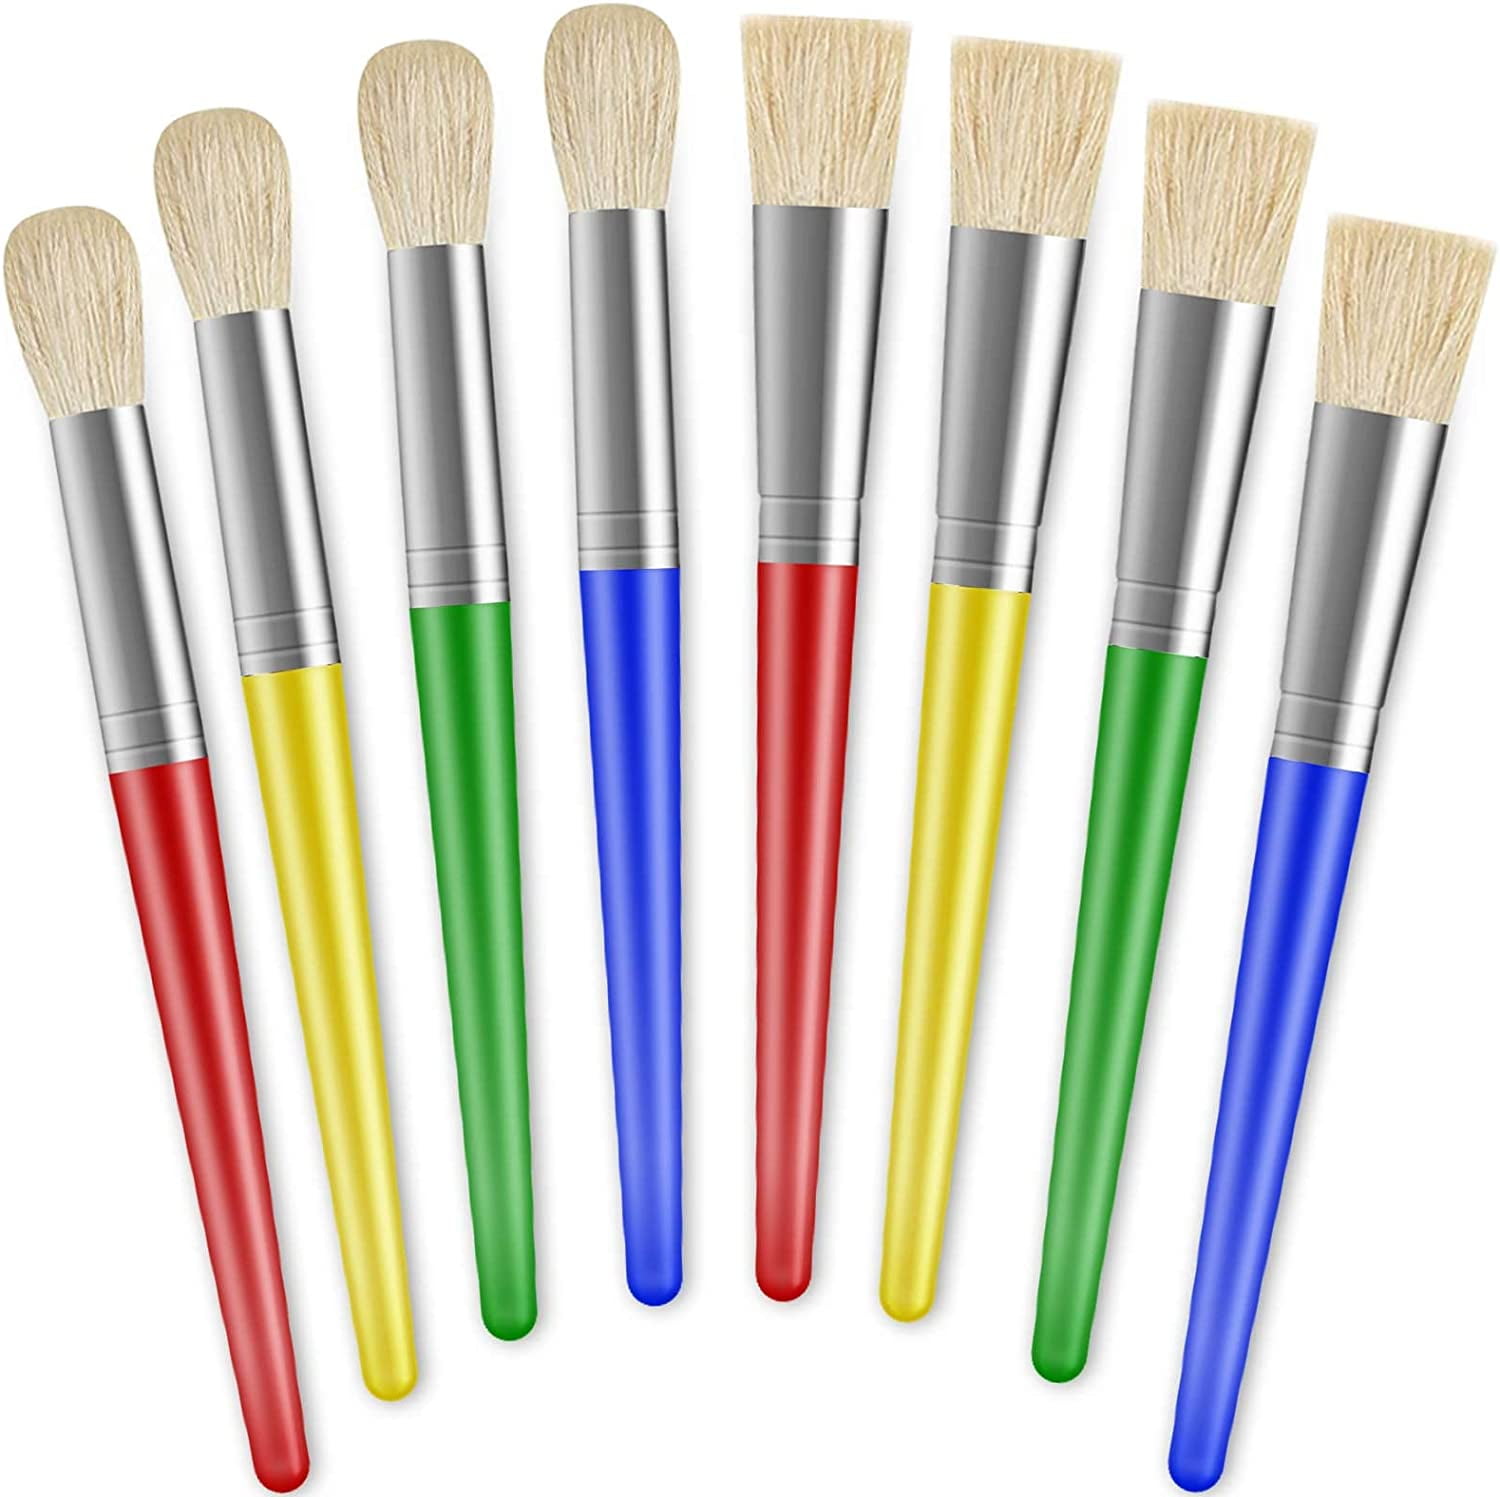 DIY MINIATURE PAINT BRUSHES  How to make PAINT BRUSHES for BARBIE